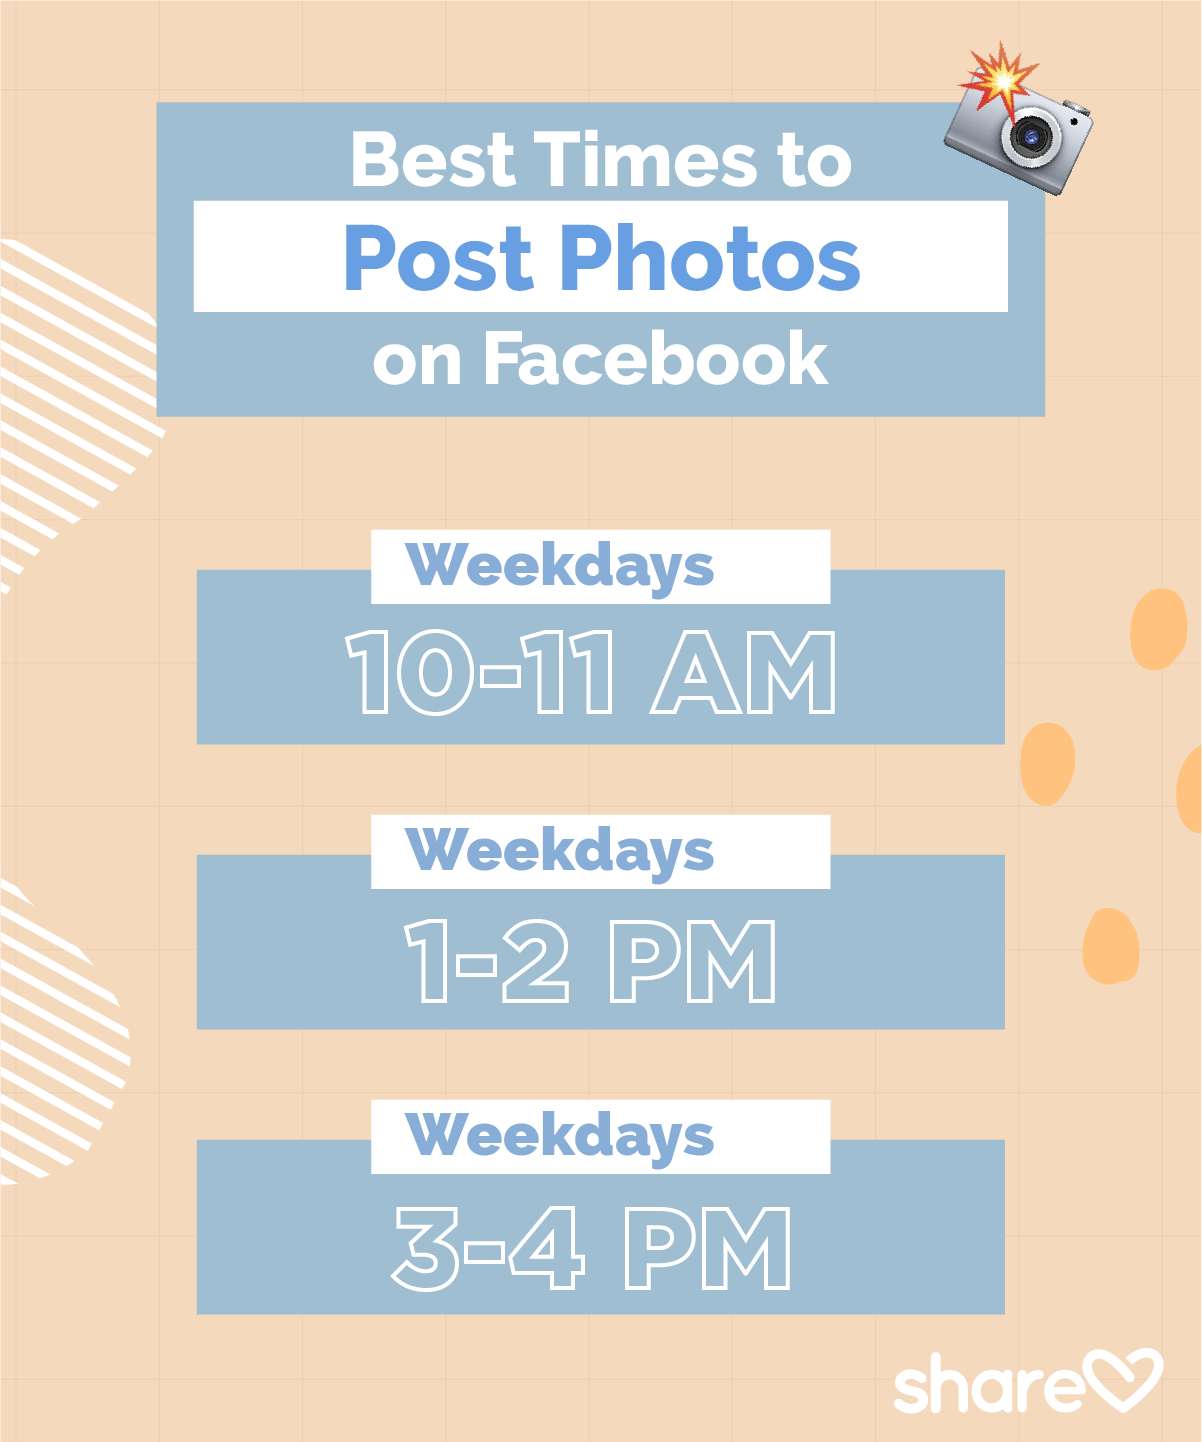 Best times to post photos on Facebook